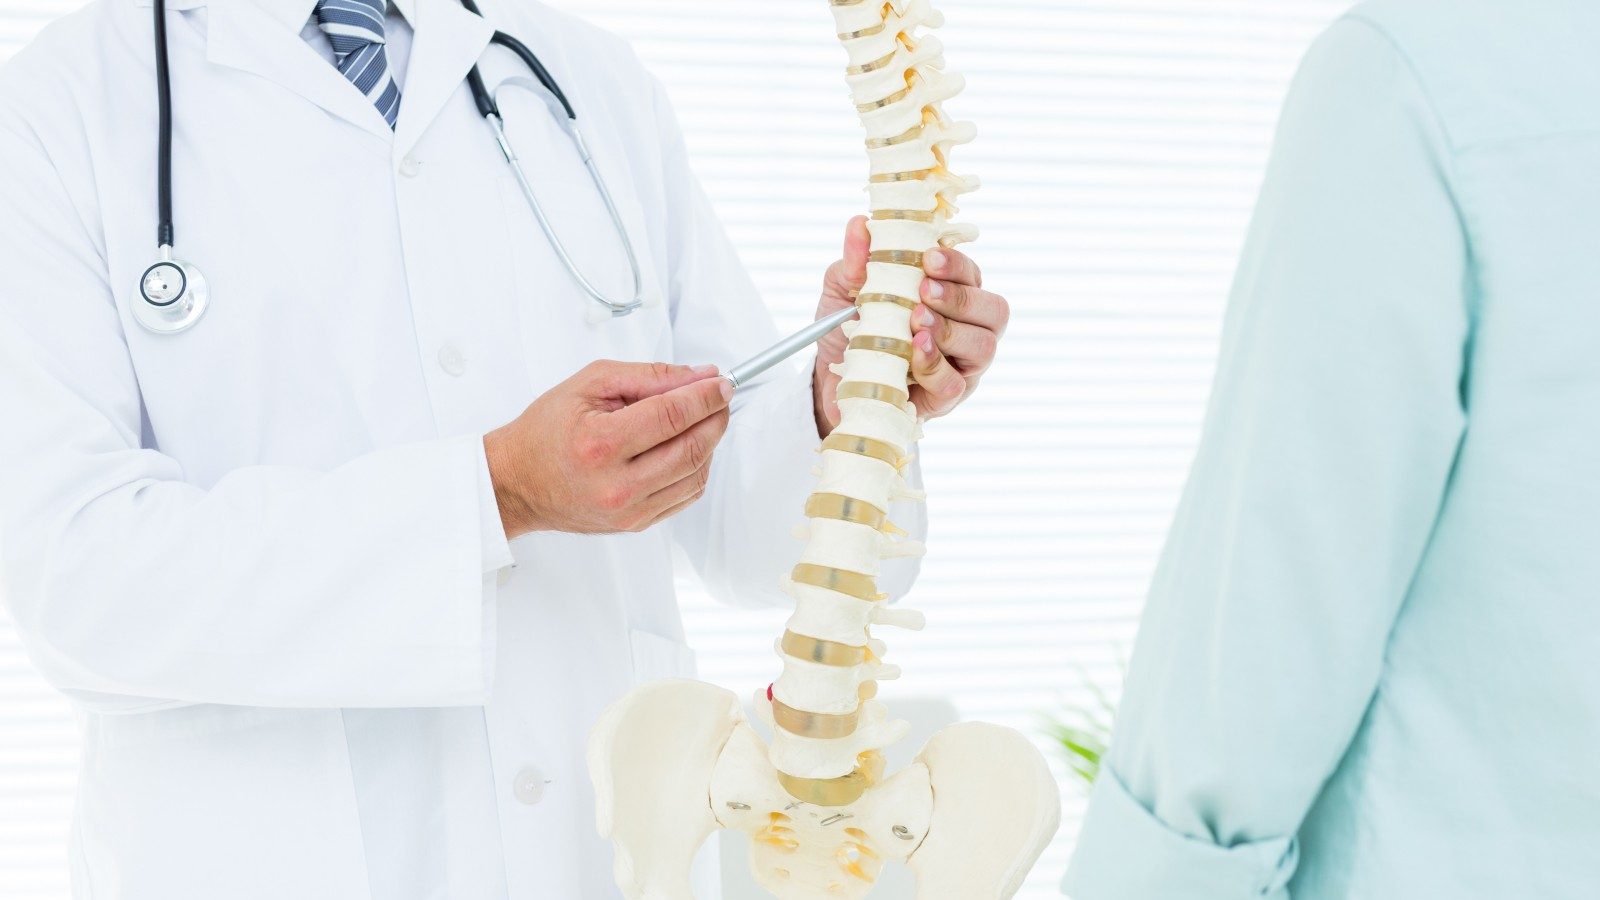 World Spine Day 2022: Theme, History, Significance, and Tips to Maintain Good Spinal Health